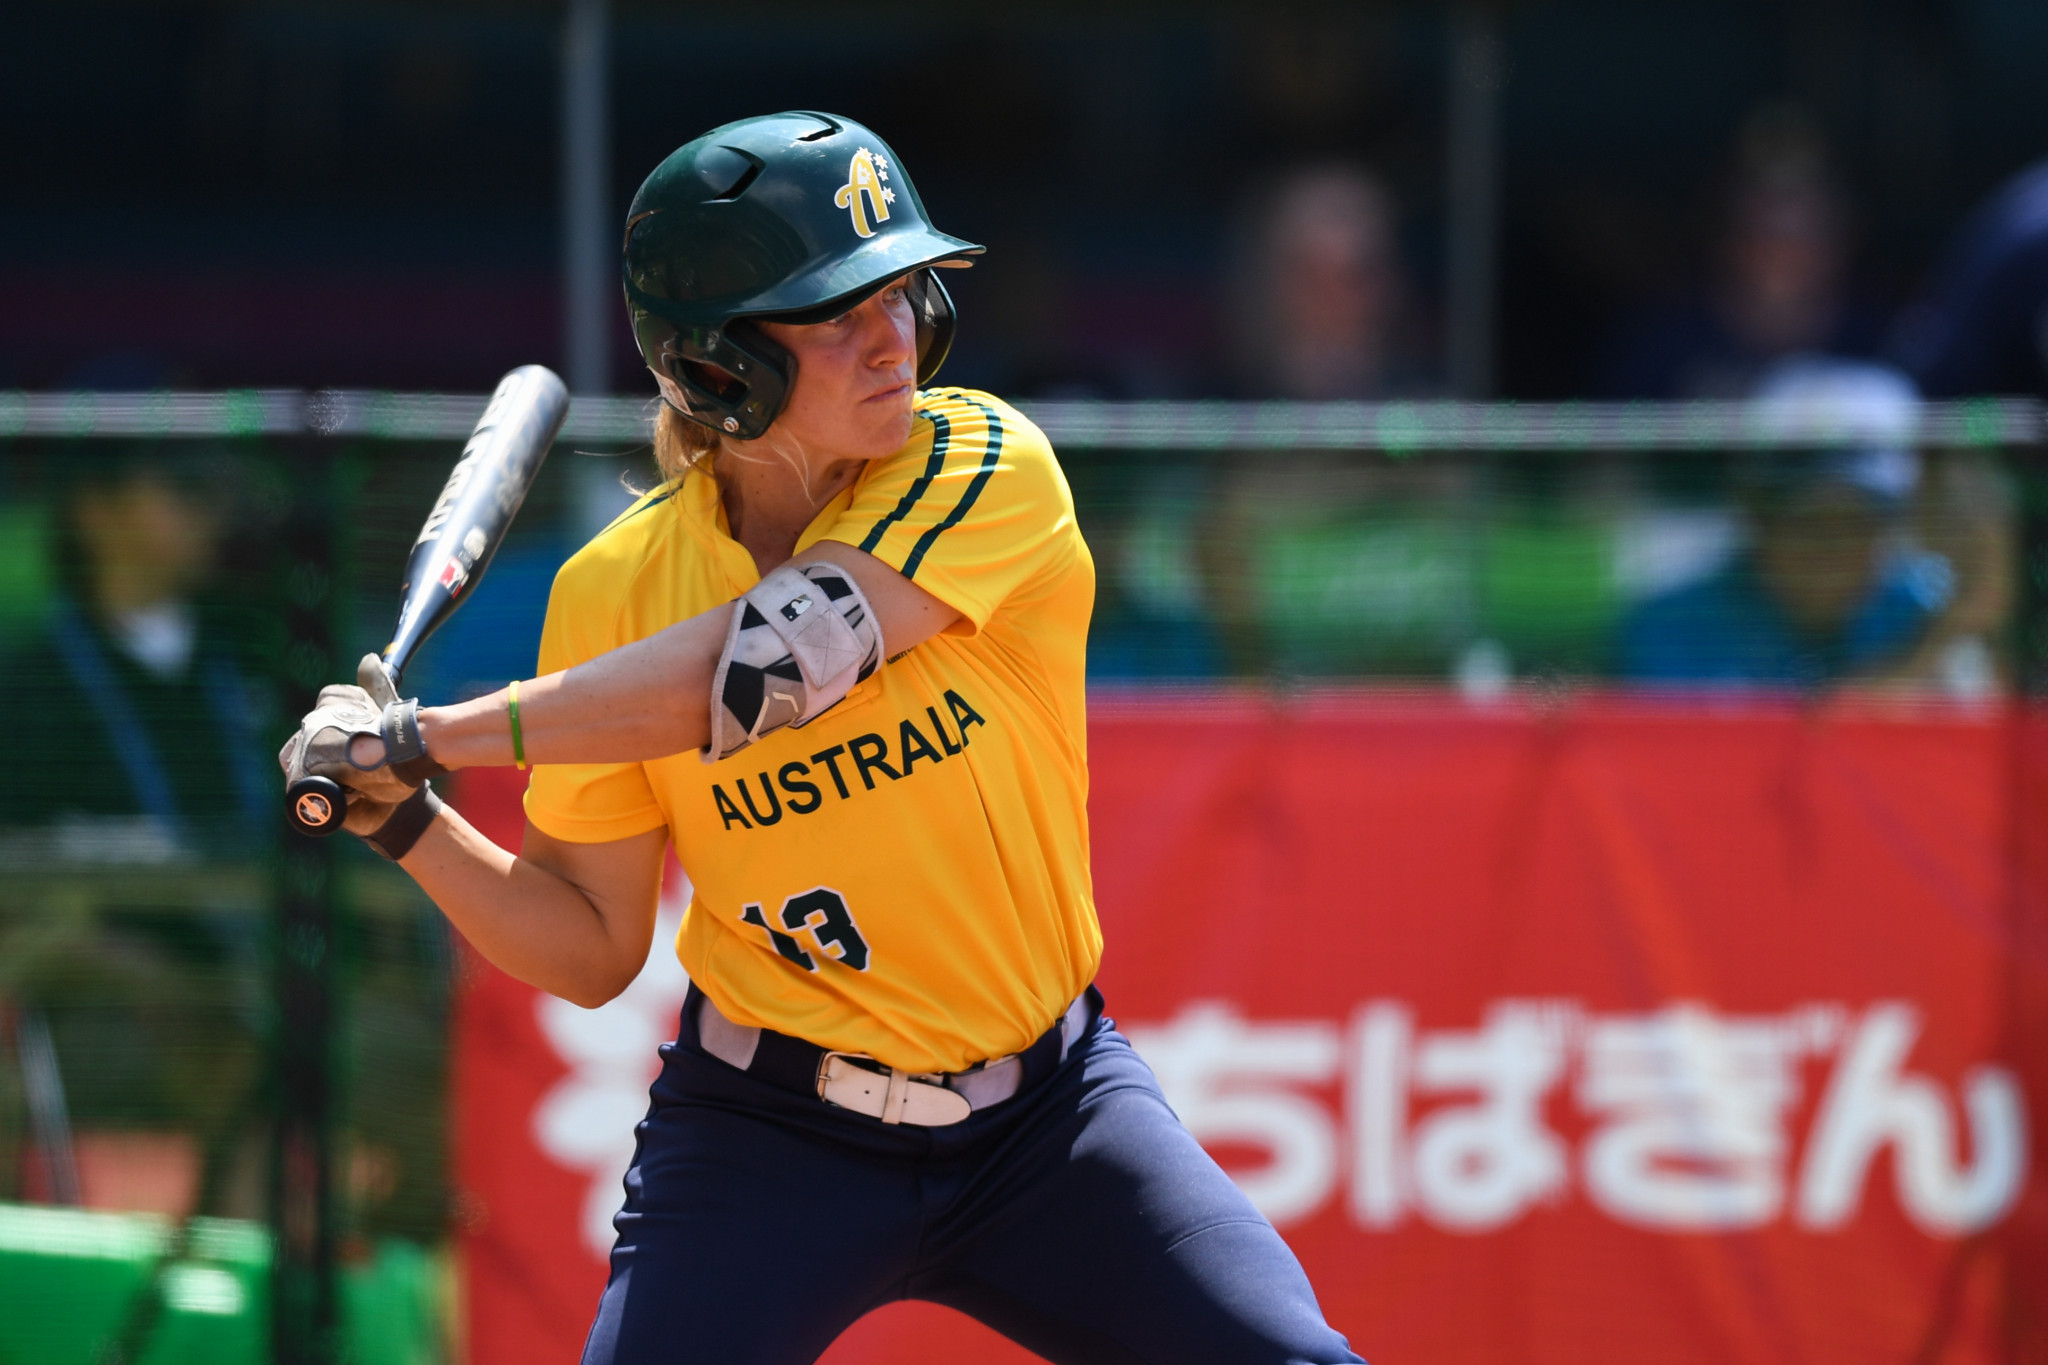 Softball Australia have agreed with the delay to the Tokyo 2020 Olympics ©Getty Images